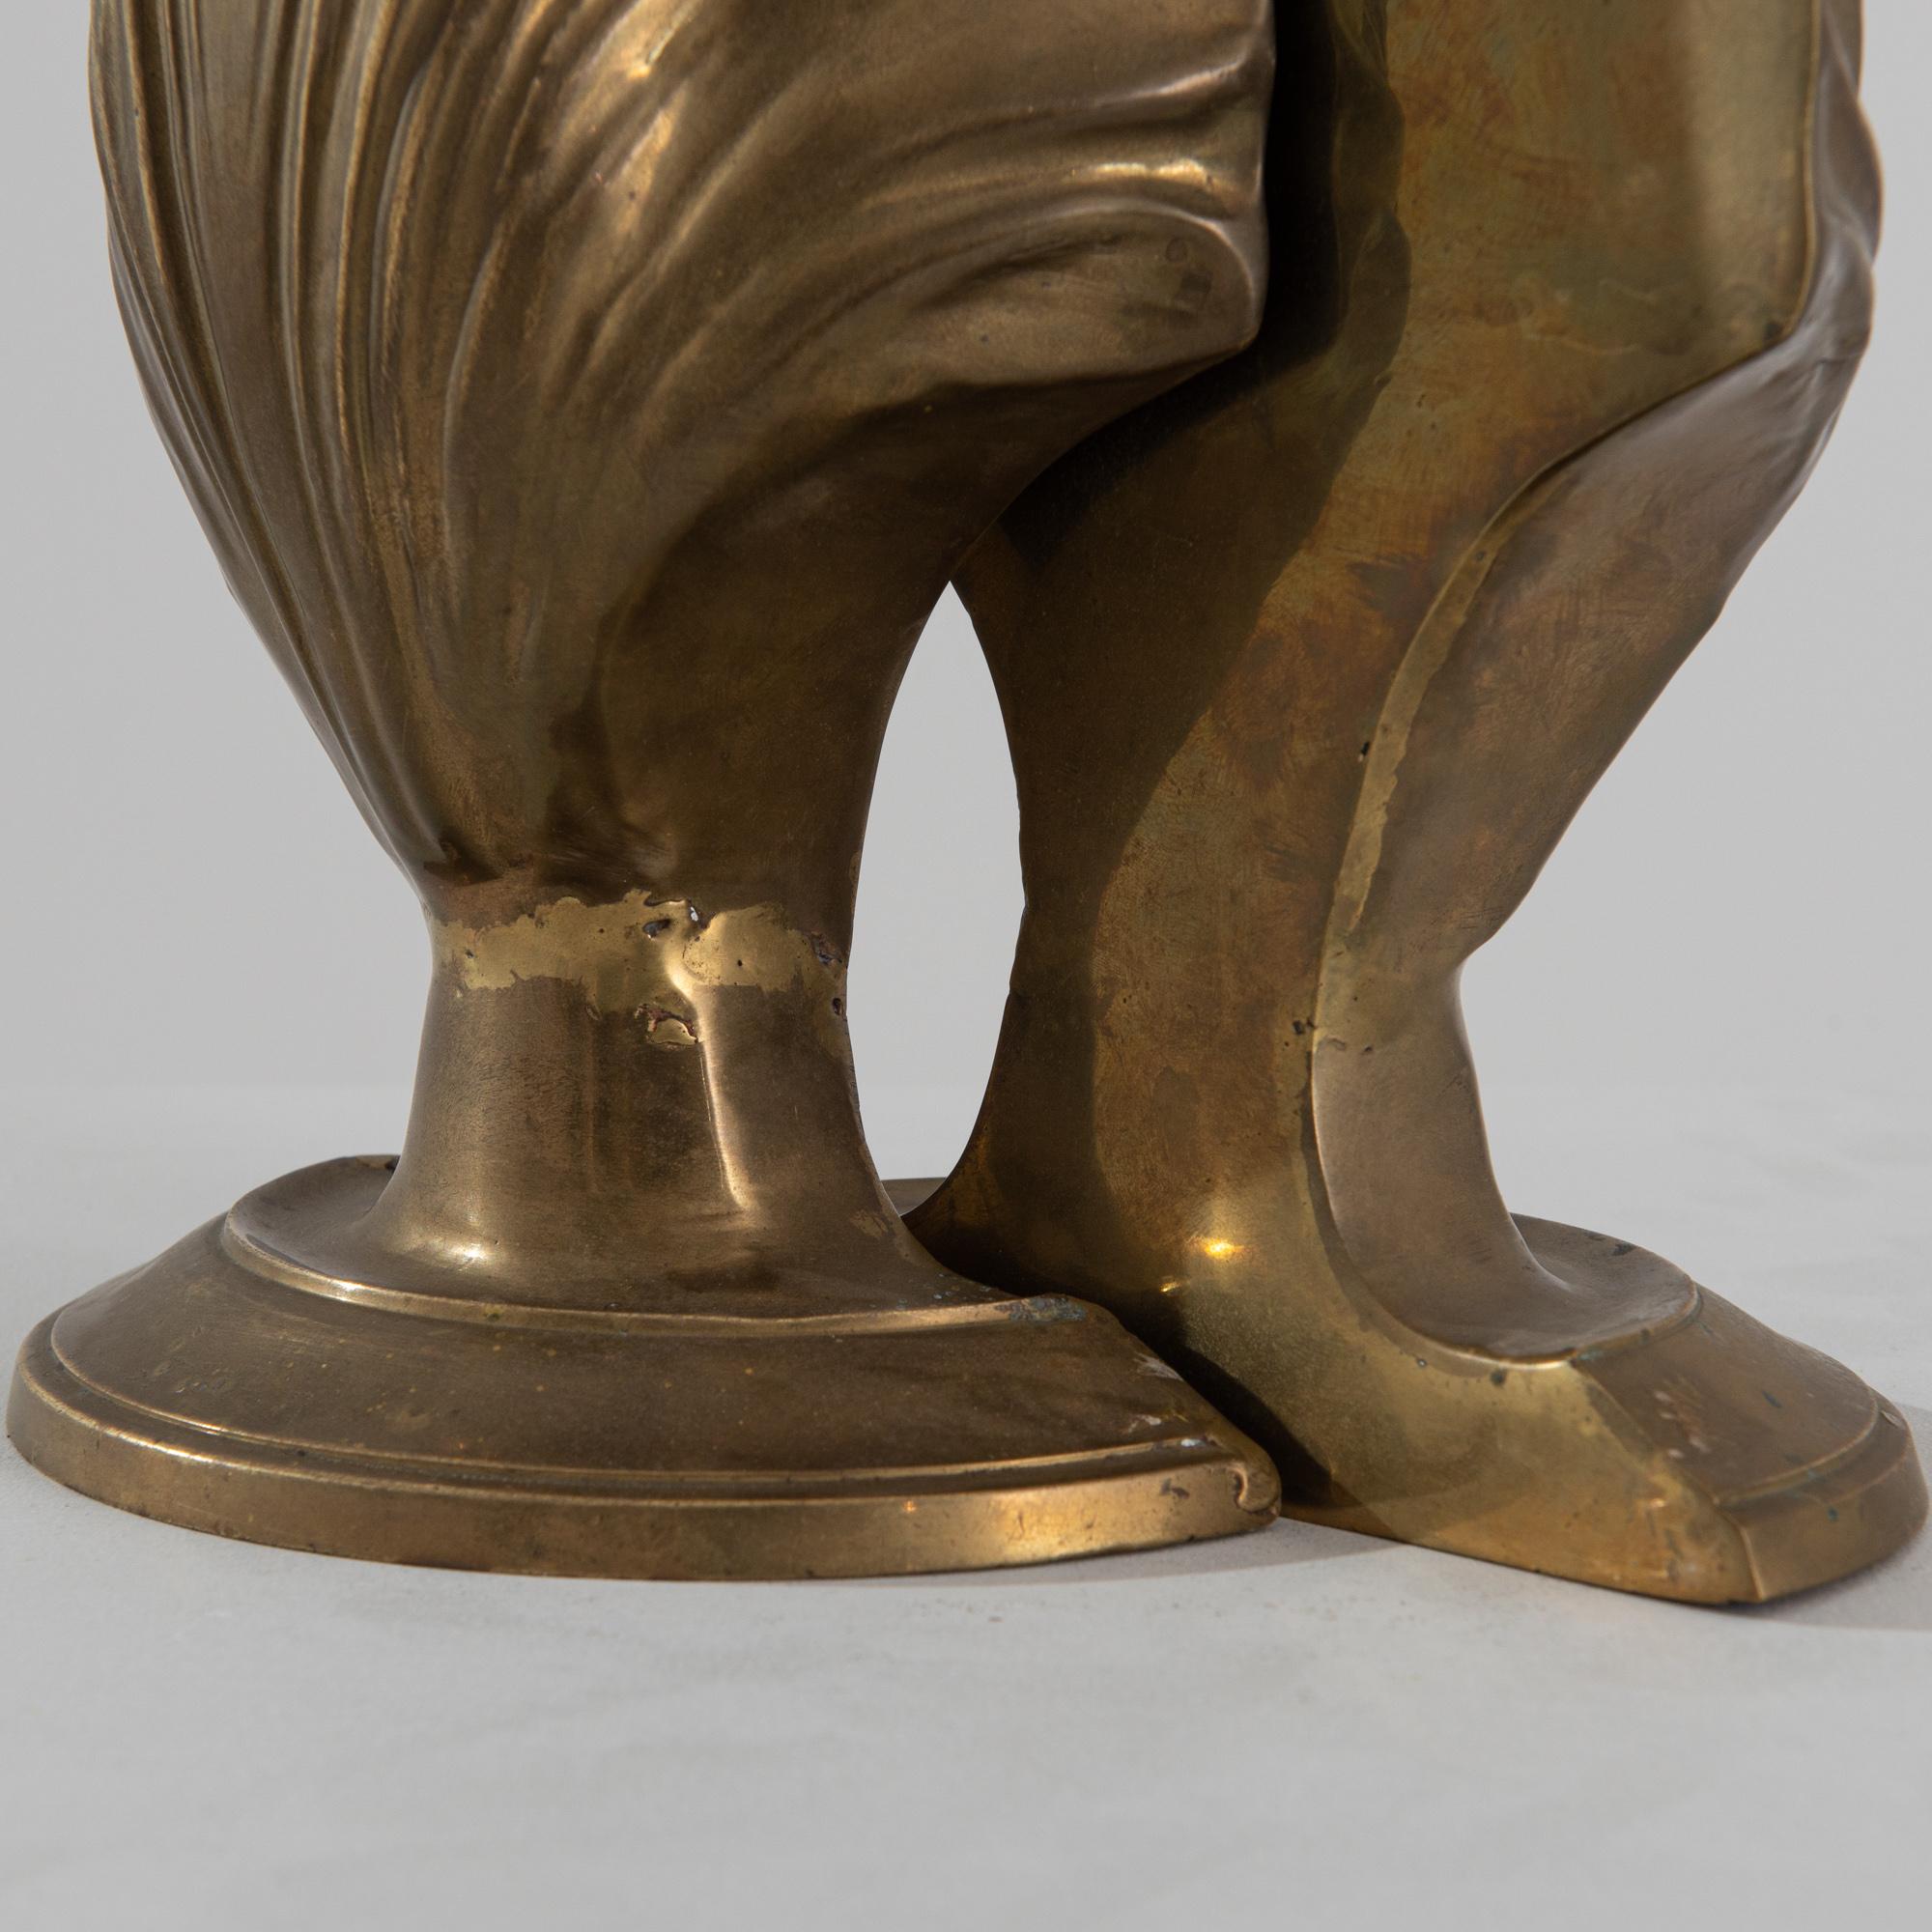 A pair of 20th century brass bookends from Italy, these gilded decorations embody an oyster-like motif, holding pearls of knowledge. Presenting a smooth surface and a molded one, these standing shells can be reunited to form a whole. The molded form